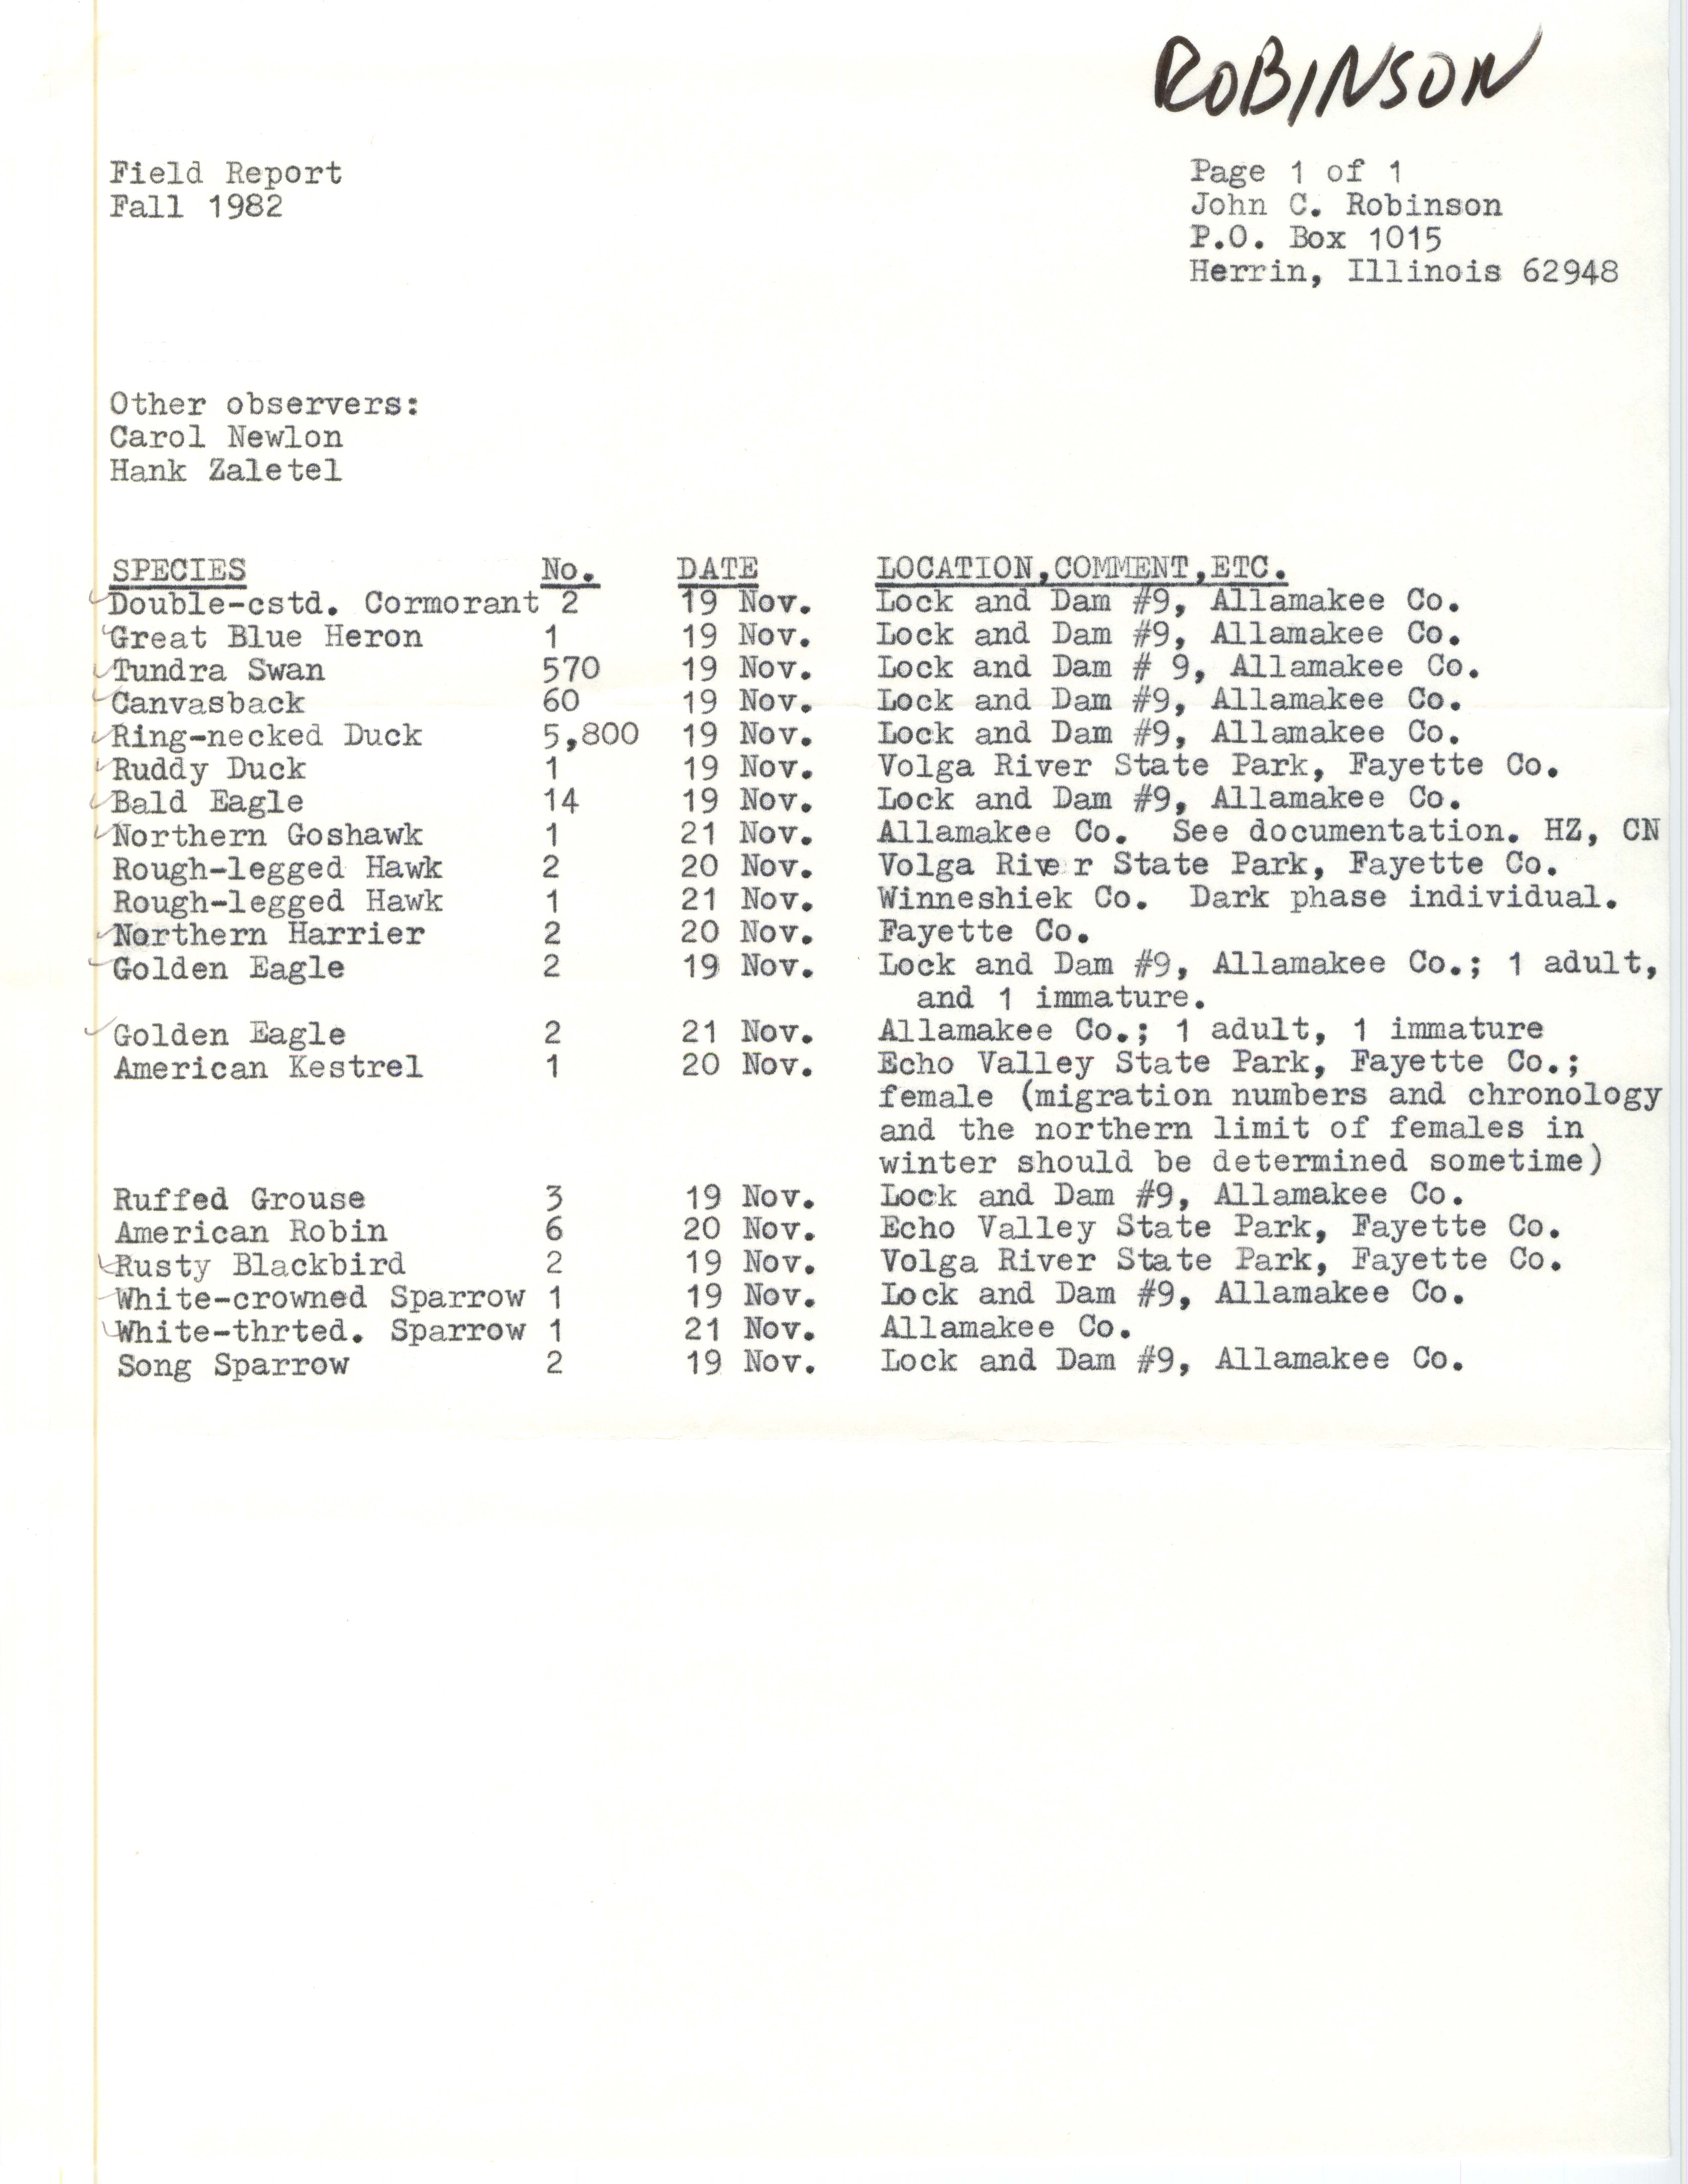 Field notes contributed by John C. Robinson, fall 1982